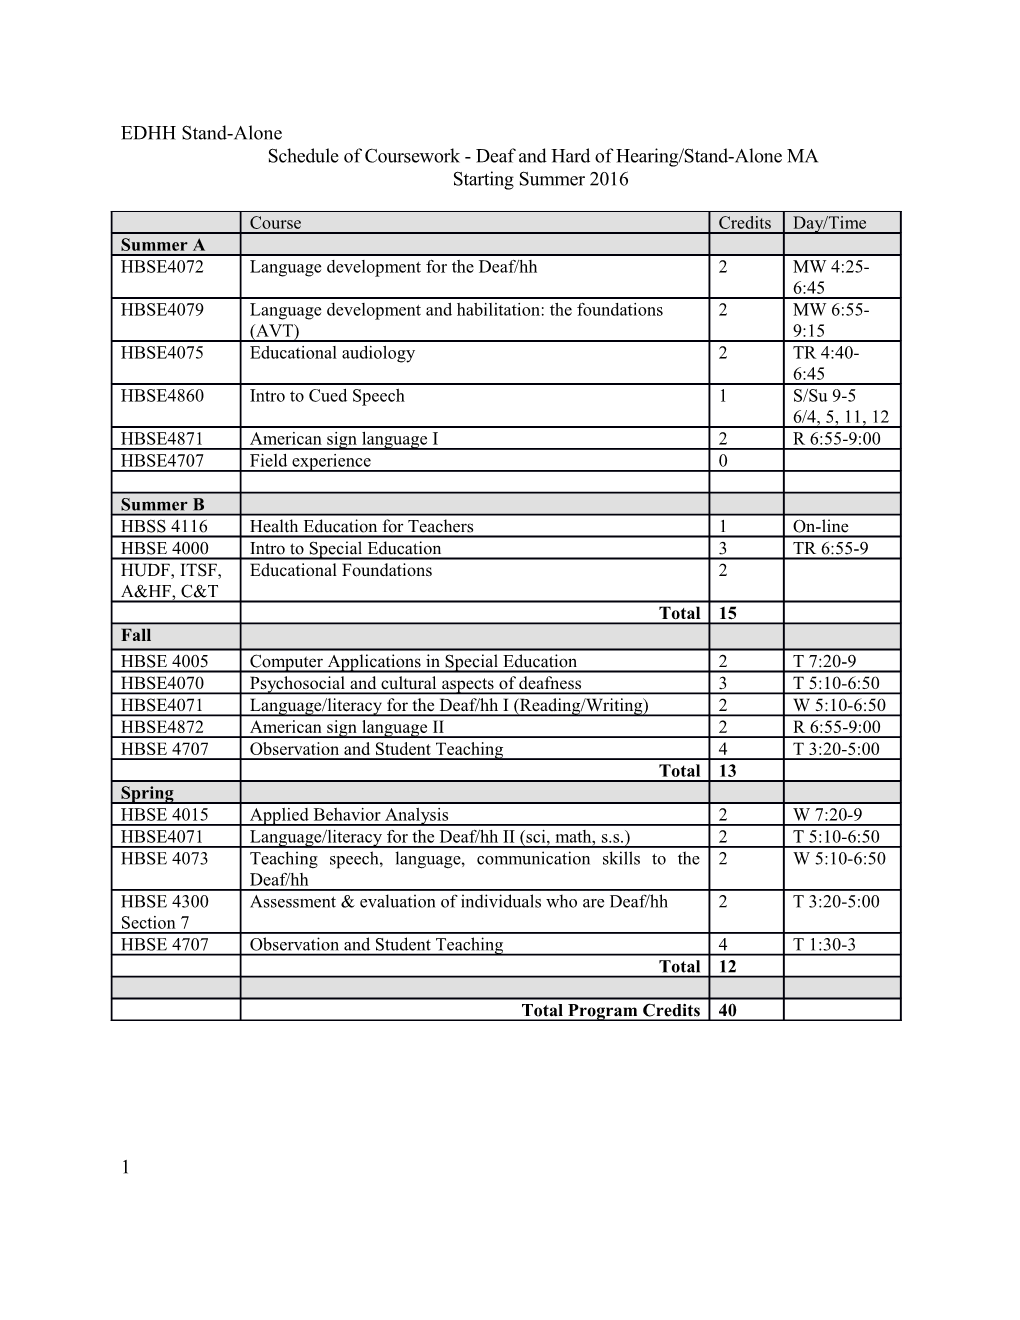 Schedule of Coursework - Deaf and Hard of Hearing/Stand-Alone MA